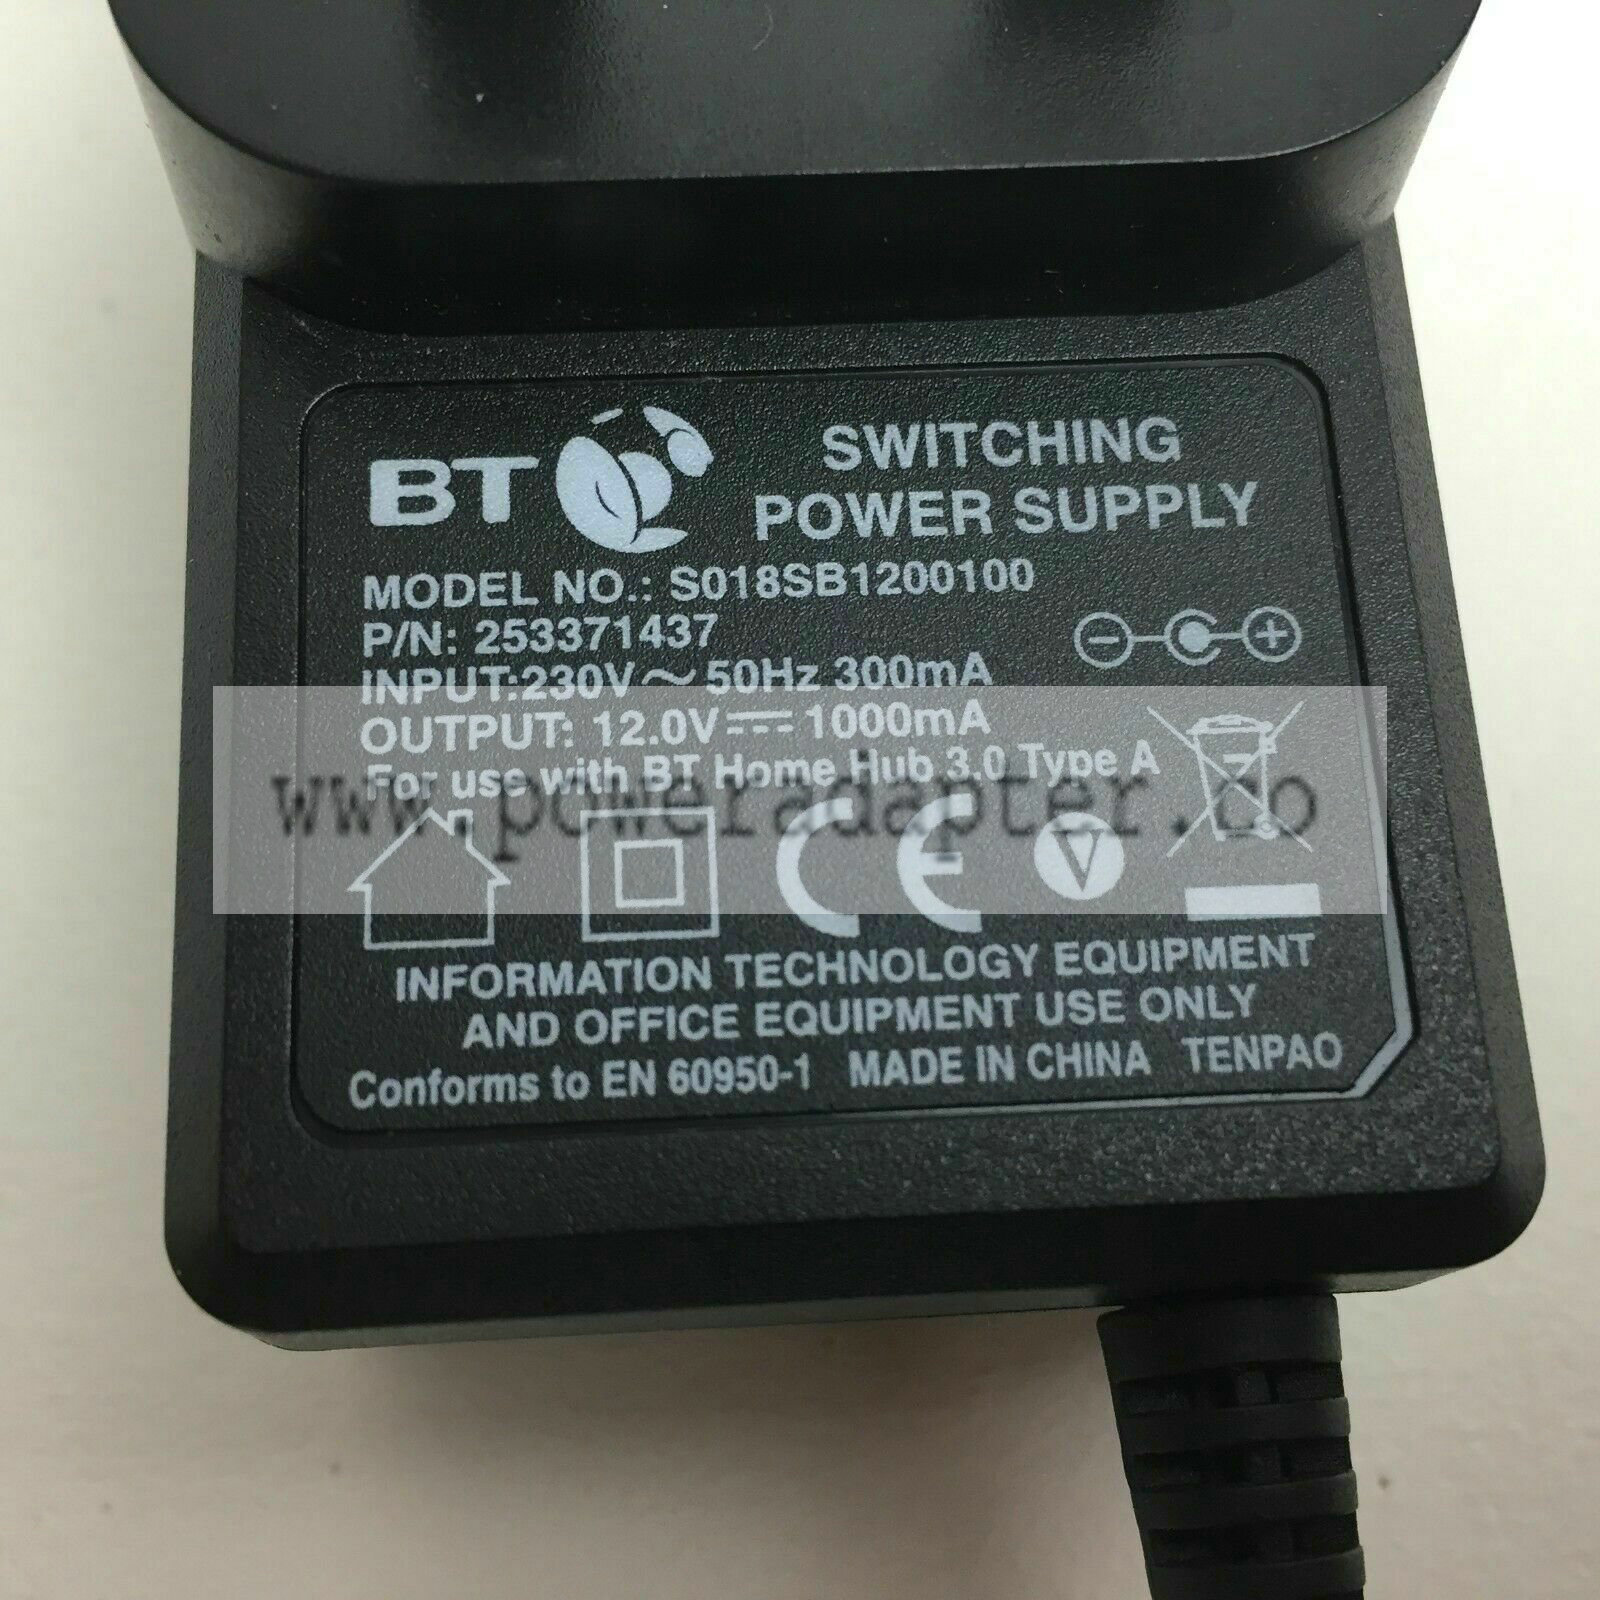 BT Switching Power Supply - Unit AC Adaptor For BT Home Hub 3.0 Type A (Item 1) Brand: BT MPN: S012NB1200100 EAN: